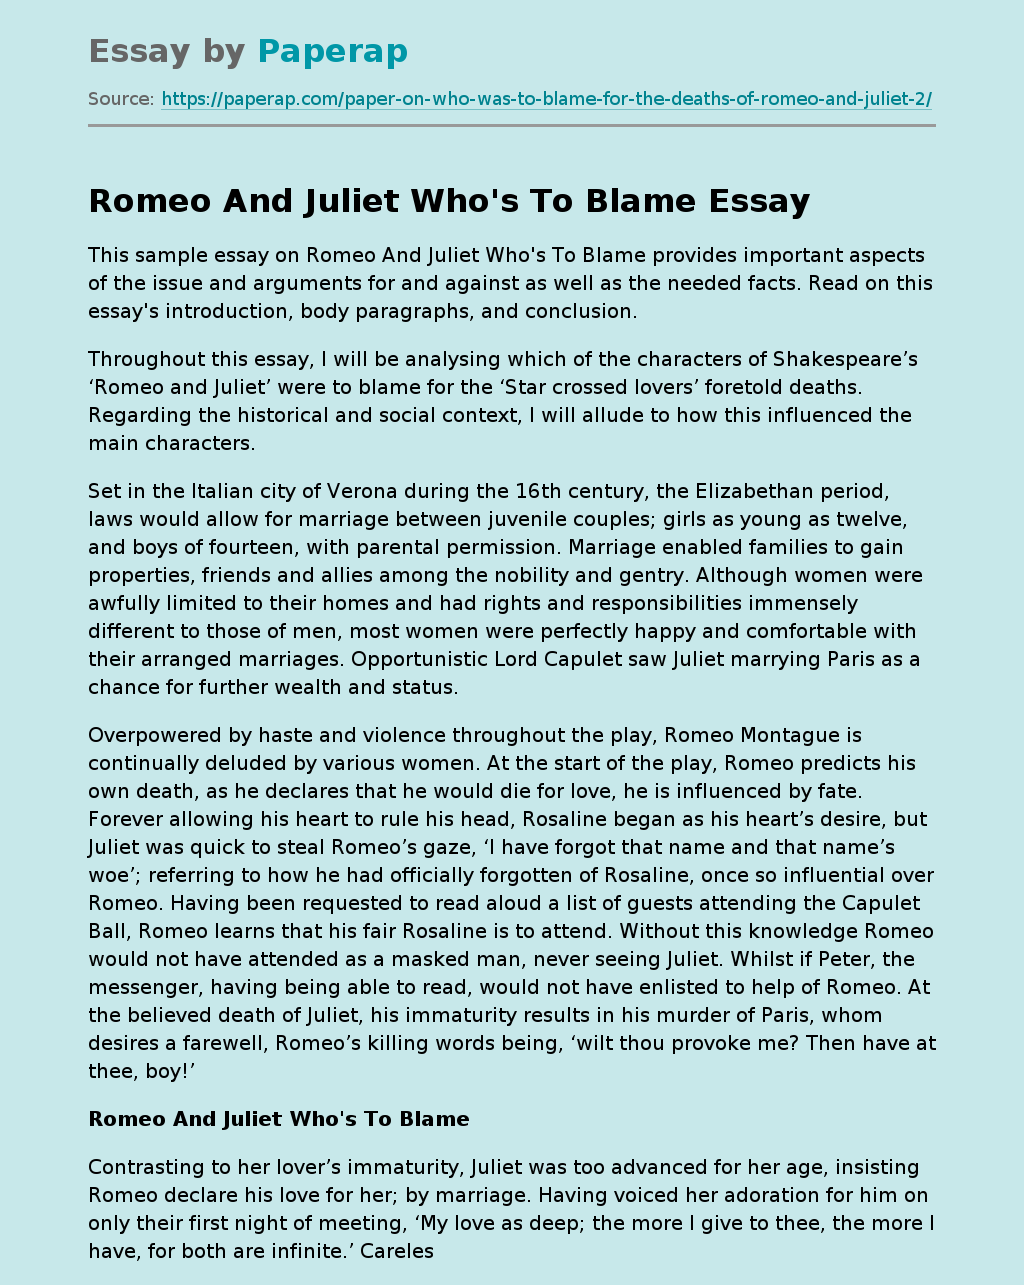 romeo and juliet essay prompt who is to blame